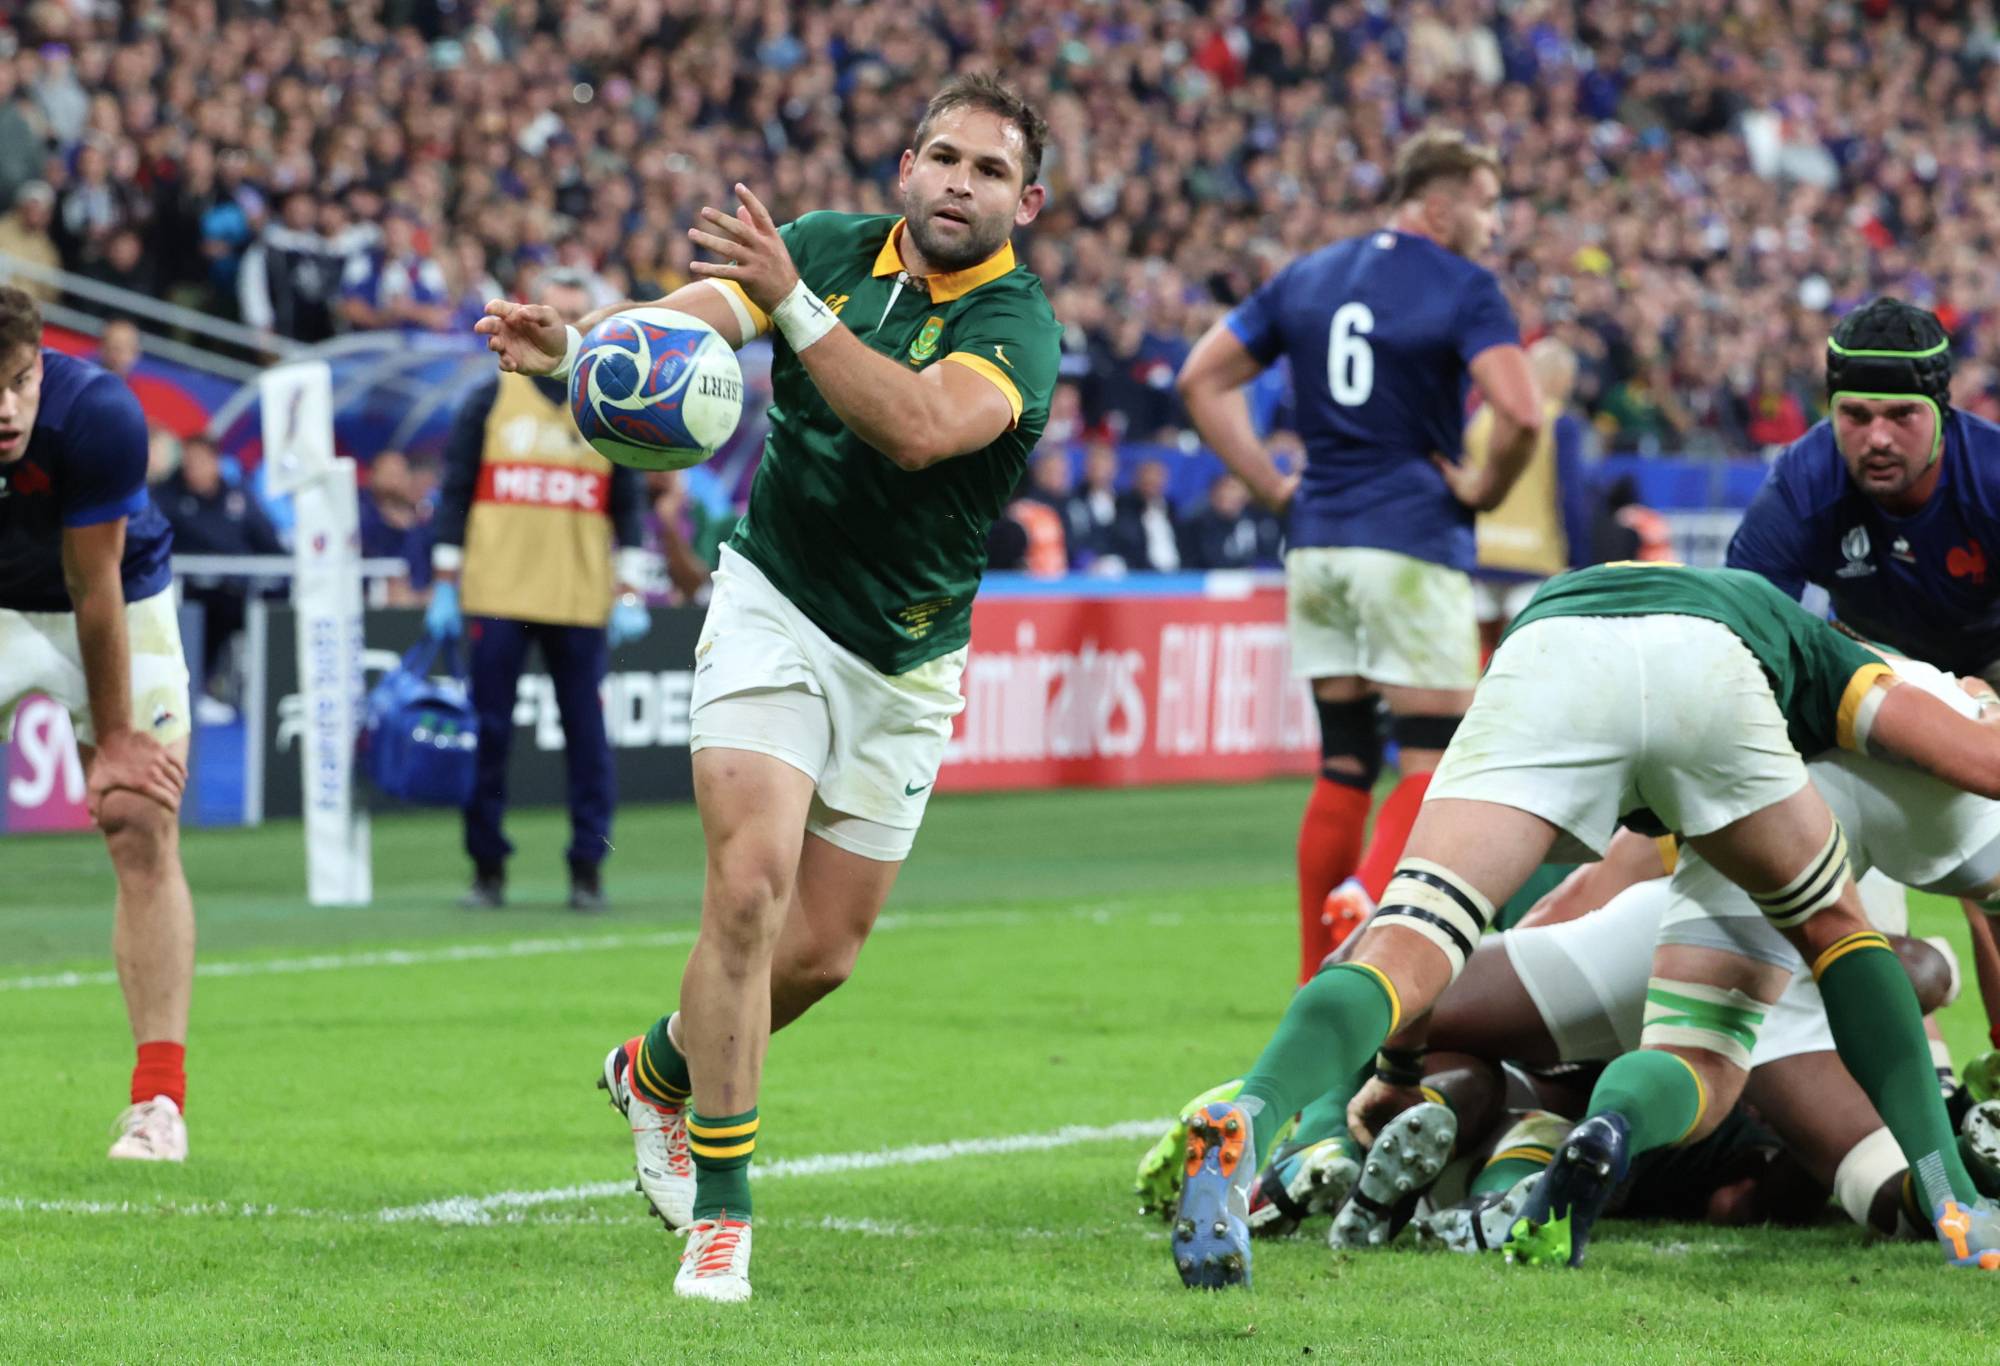 Cobus Reinach #9 of Team South Africa in action during the Rugby World Cup France 2023 Quarter Final match between France and South Africa at Stade de France on October 15, 2023 in Paris, France. (Photo by Xavier Laine/Getty Images)